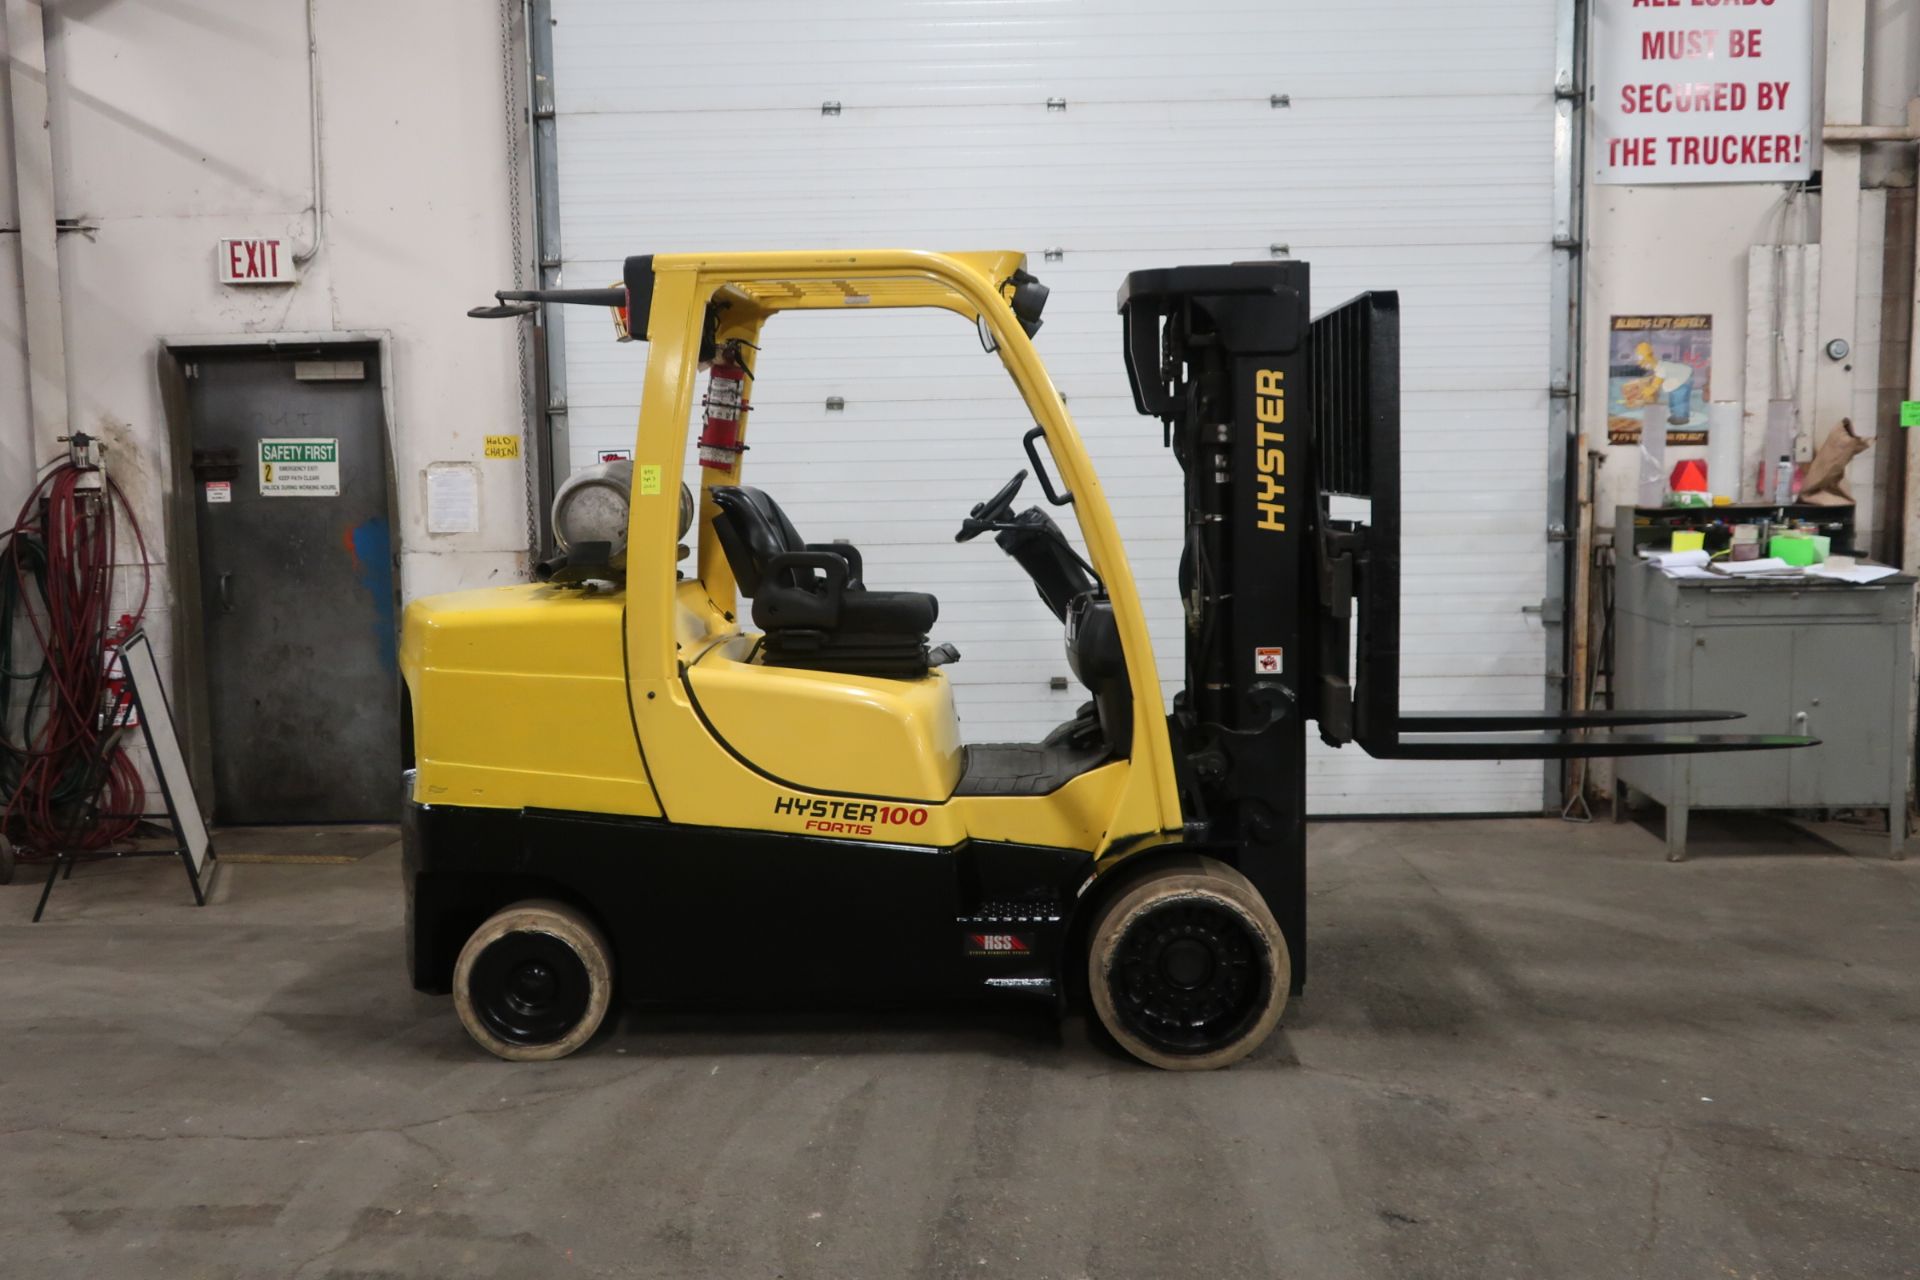 FREE CUSTOMS - 2016 Hyster 10000lbs Capacity Forklift with 3-stage mast - LPG (propane) with